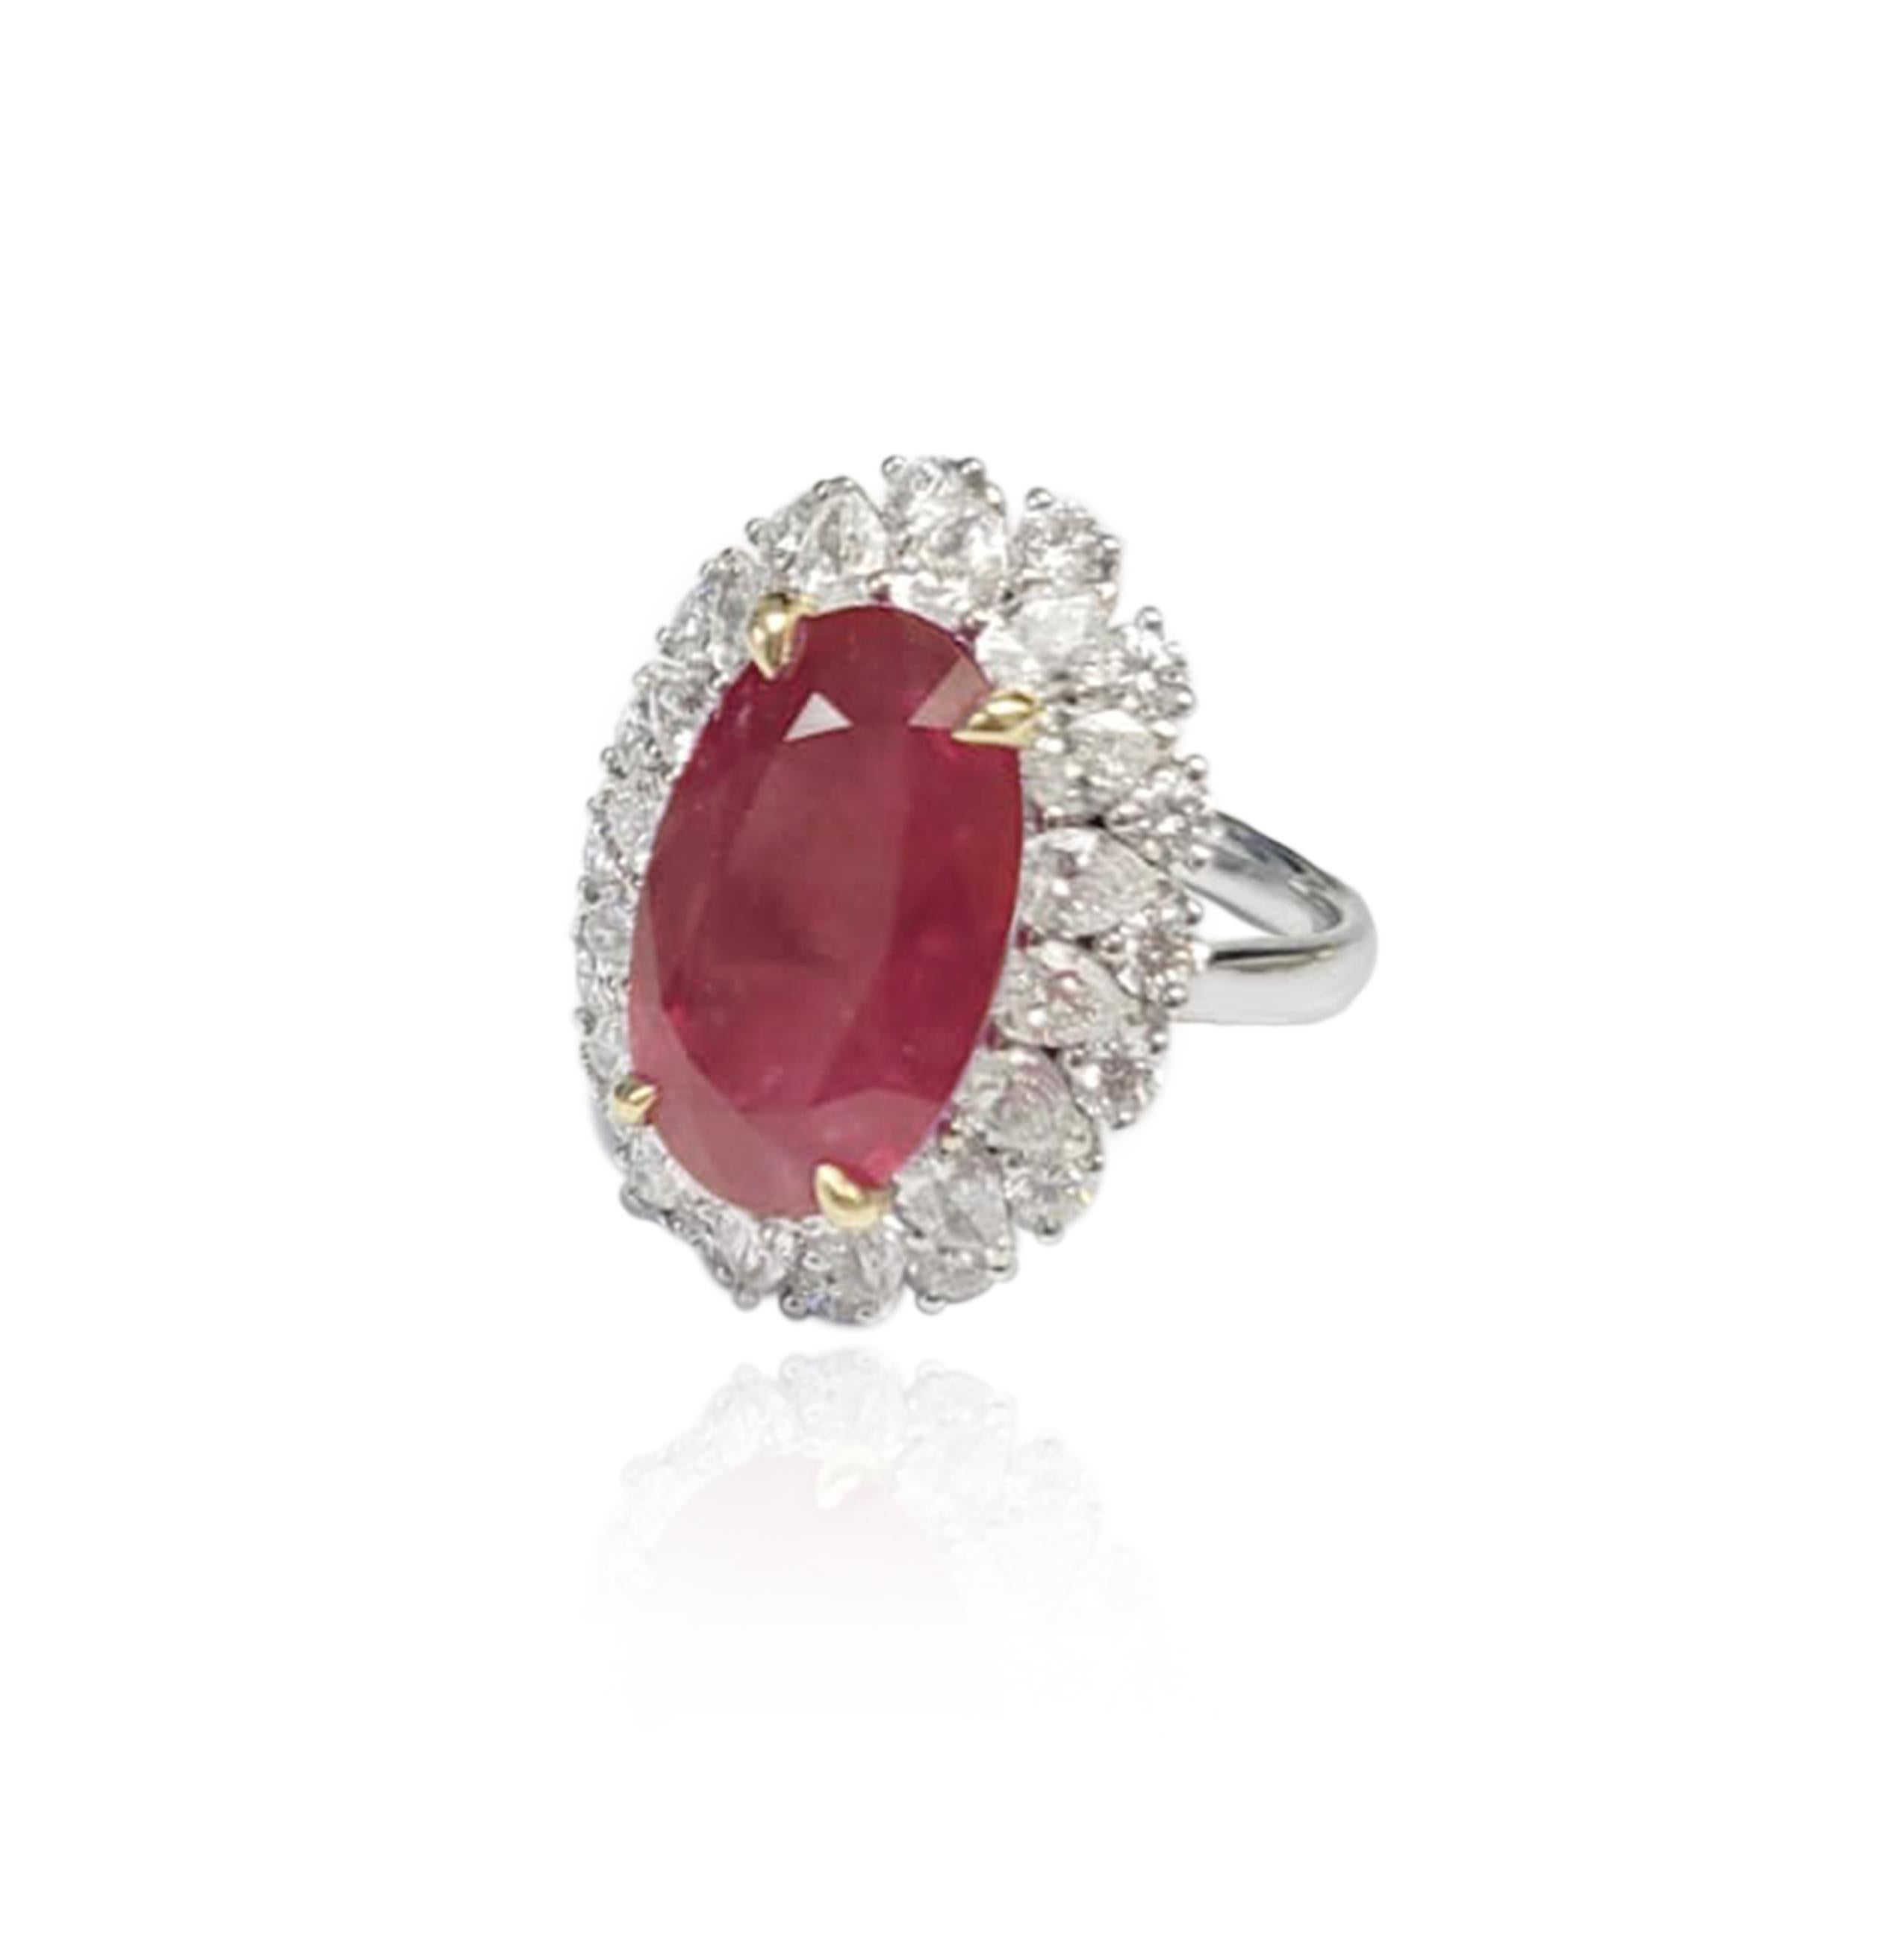 GIA certified Ruby Ring

Ruby Oval Cut (9.90ct)

Brilliant Diamonds (3.11ct)

Ring Metal - 18k White Gold

Measurements: 17.36 x 11.05 x 5.24 mm

Tag #17757